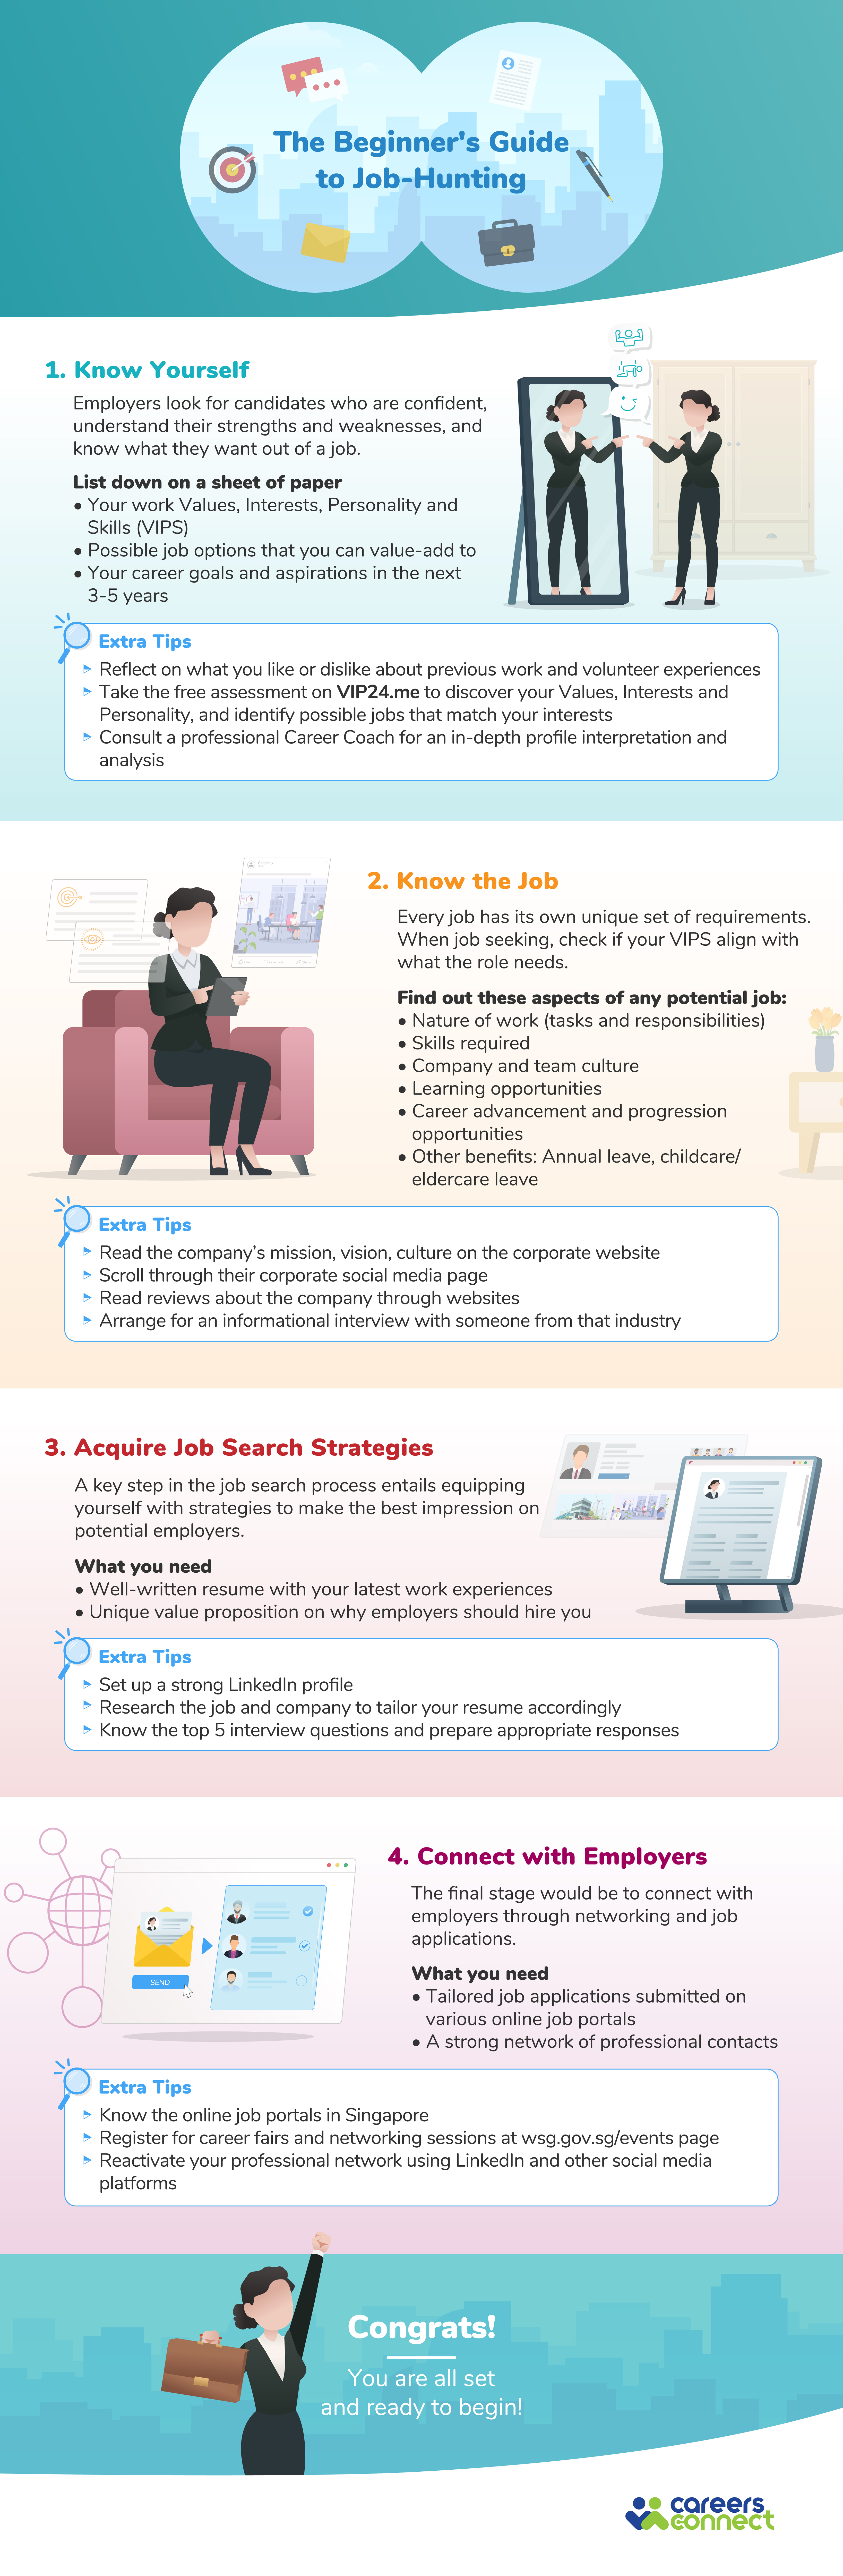 Job search 101: Beginner's Guide to Job-Hunting; WSG's Careers Connect